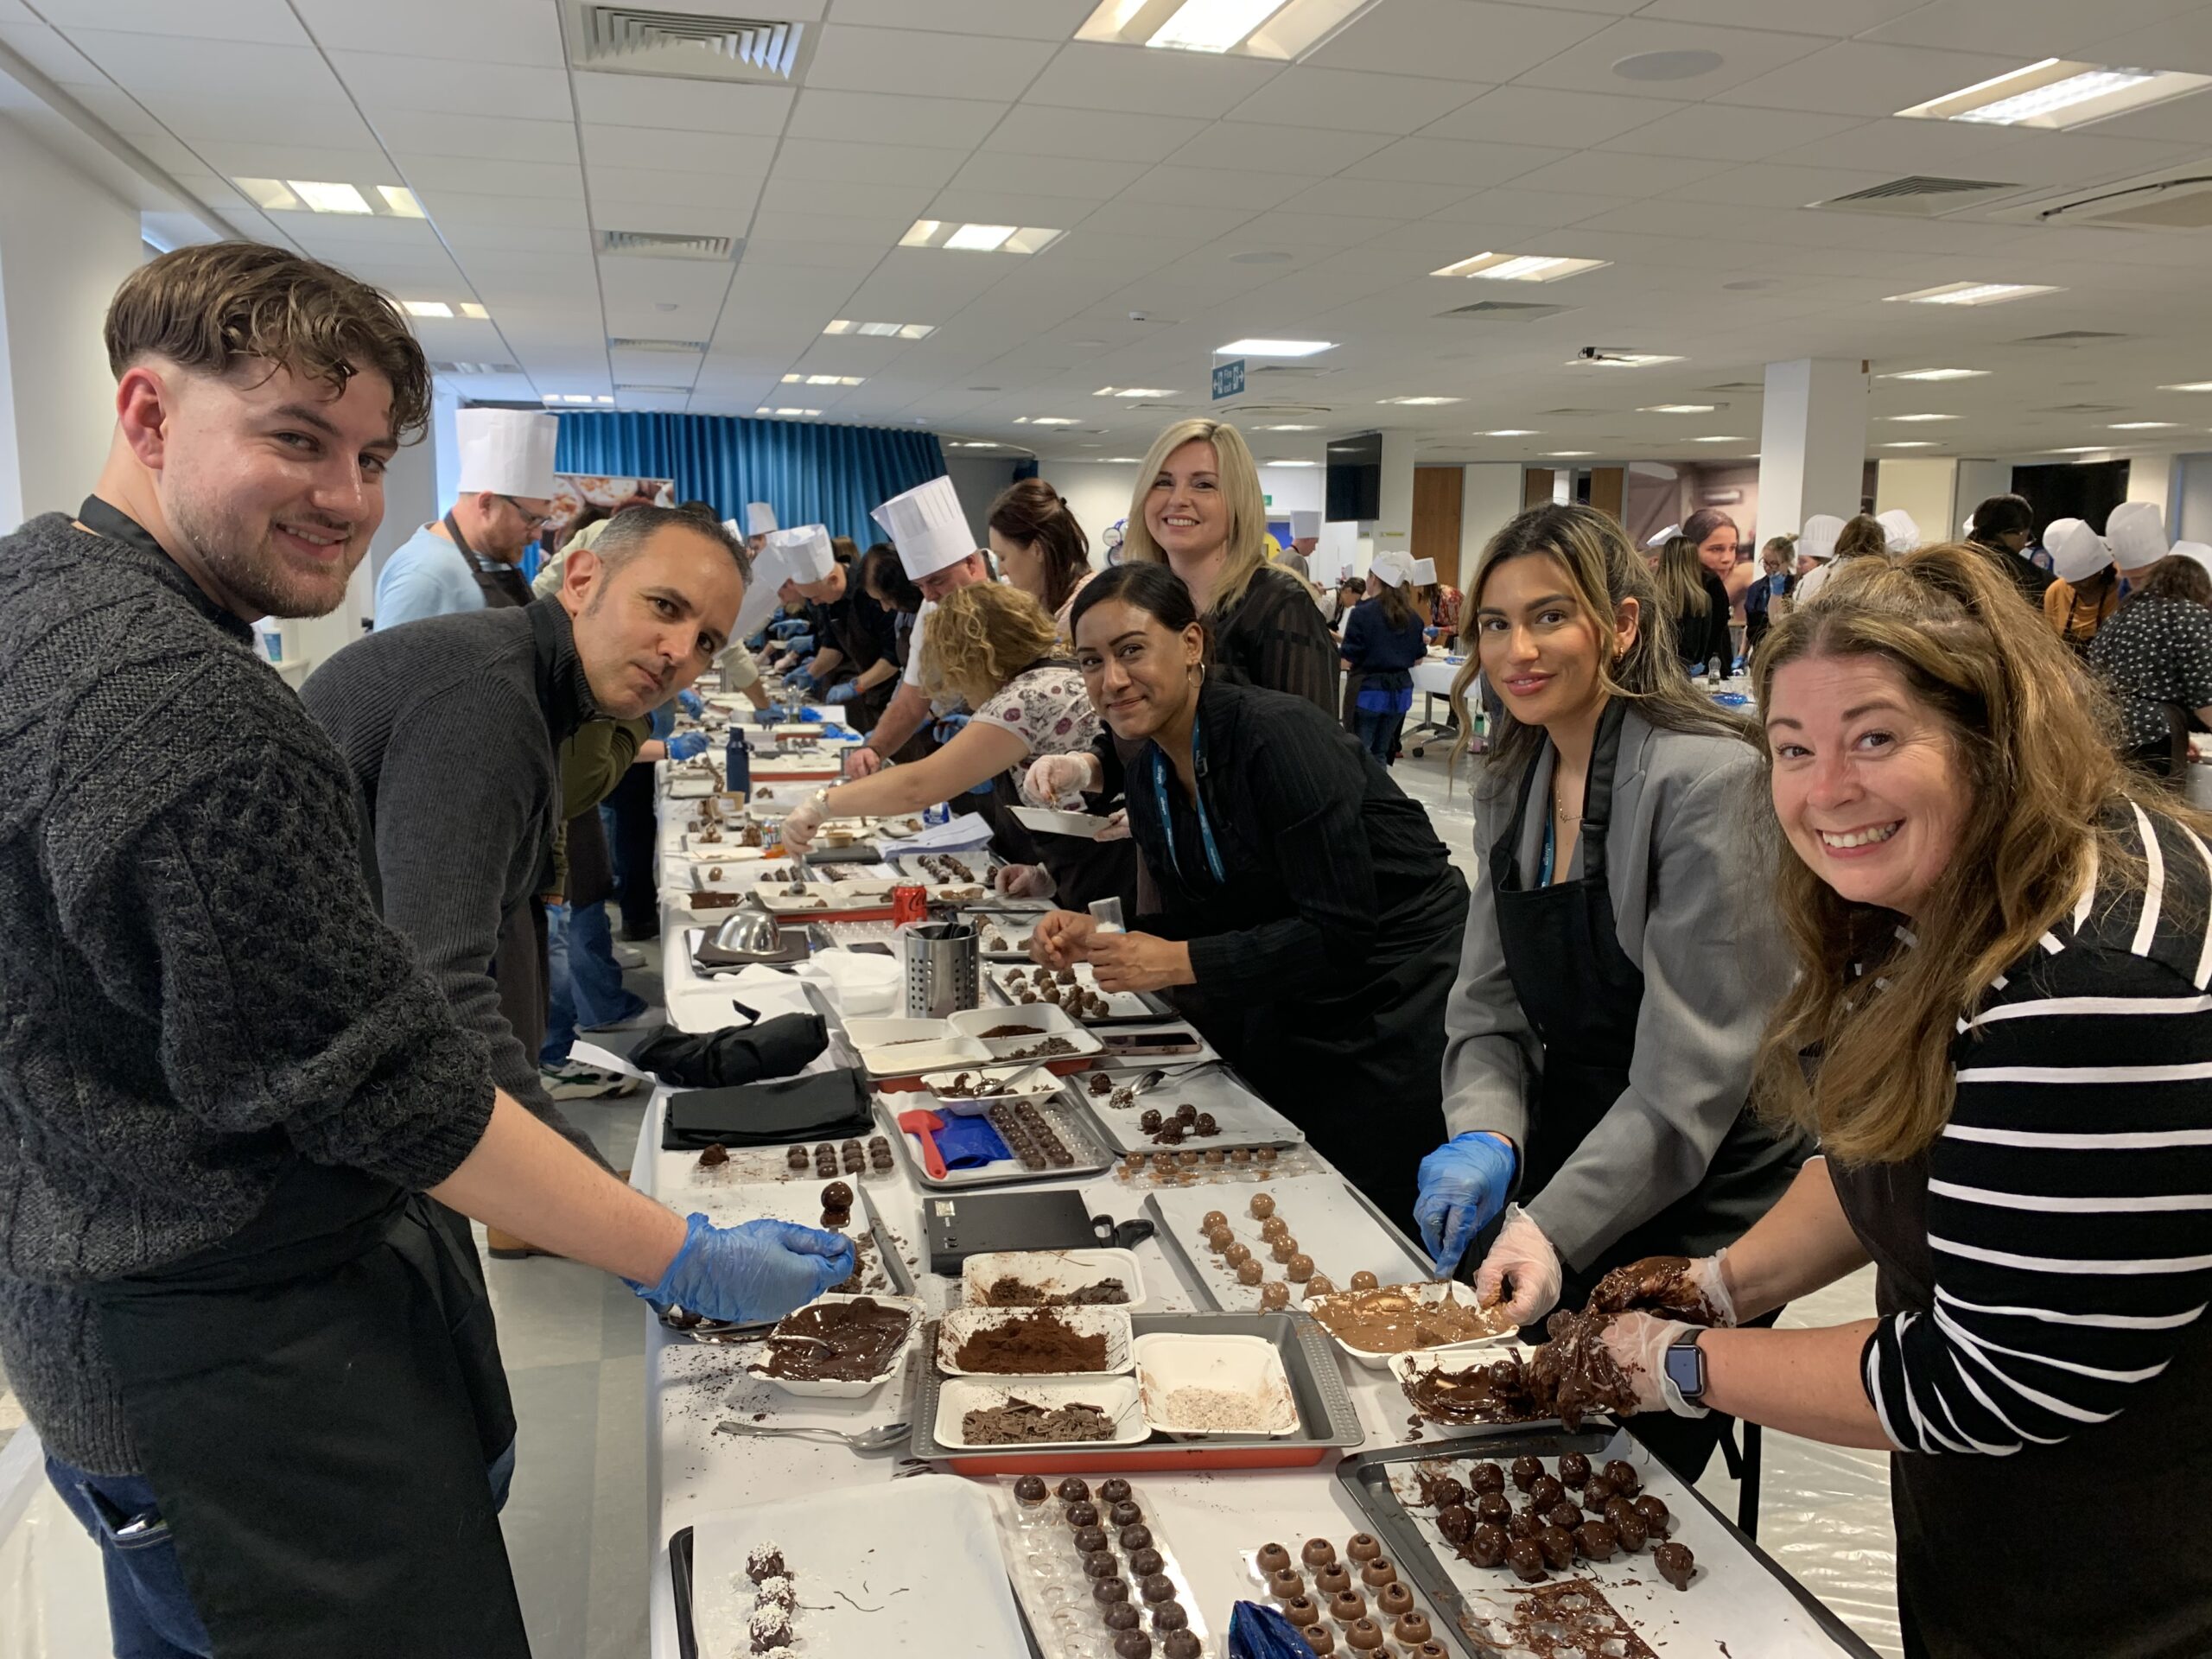 Chocolate Making Teambuilding Event